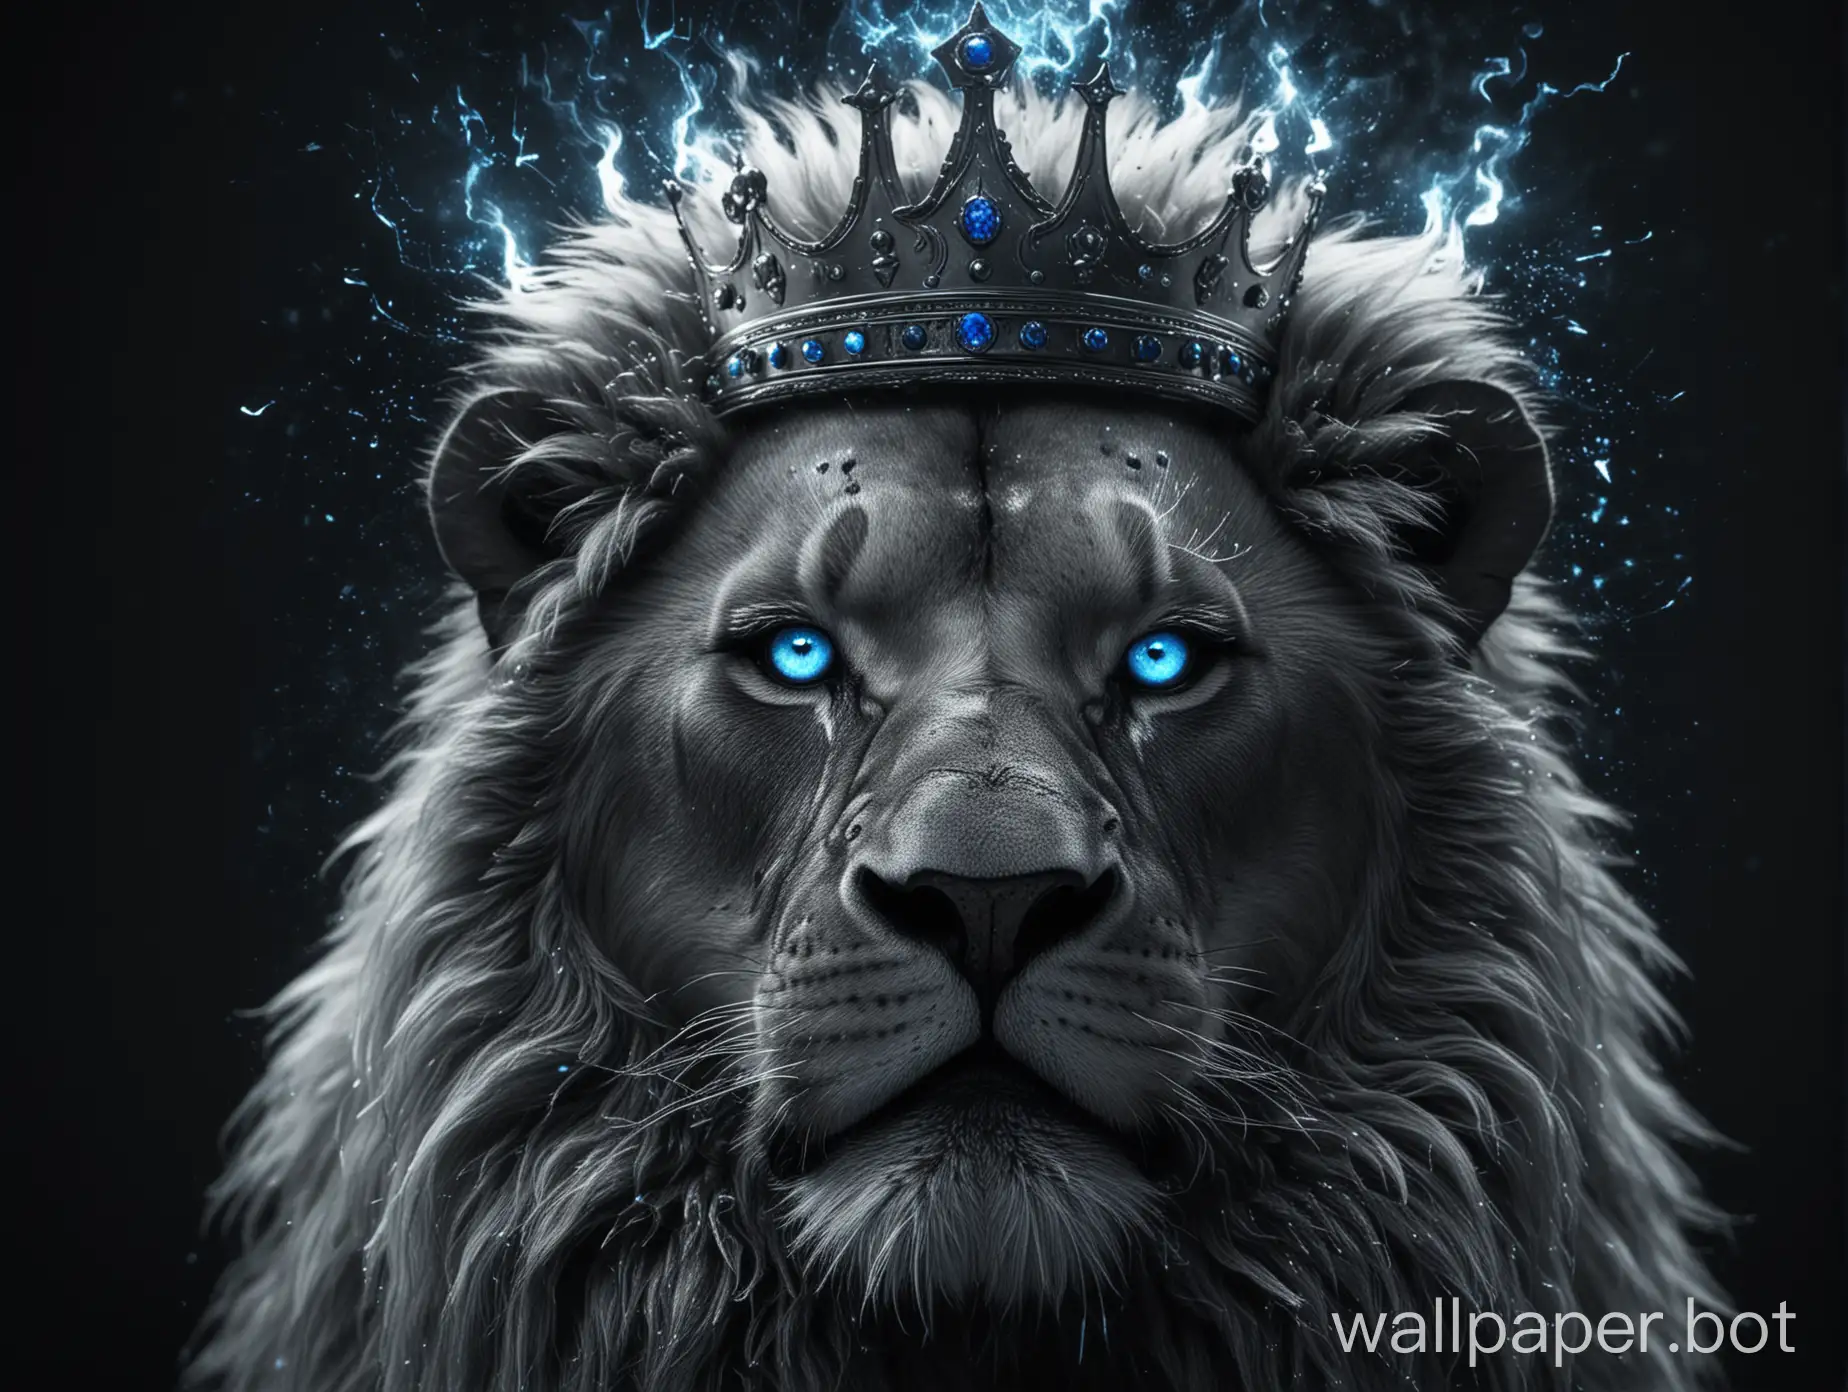 photorealistic achromatic black-and-white lion portrait, cinematic still shot, photorealistic big silver crown, epic lightining, lens aberration, neon blue fire sparks , ultra realistic fur, front view portrait, achromatic lion, king with crown on its head, strong face expression, with neon fire sparks